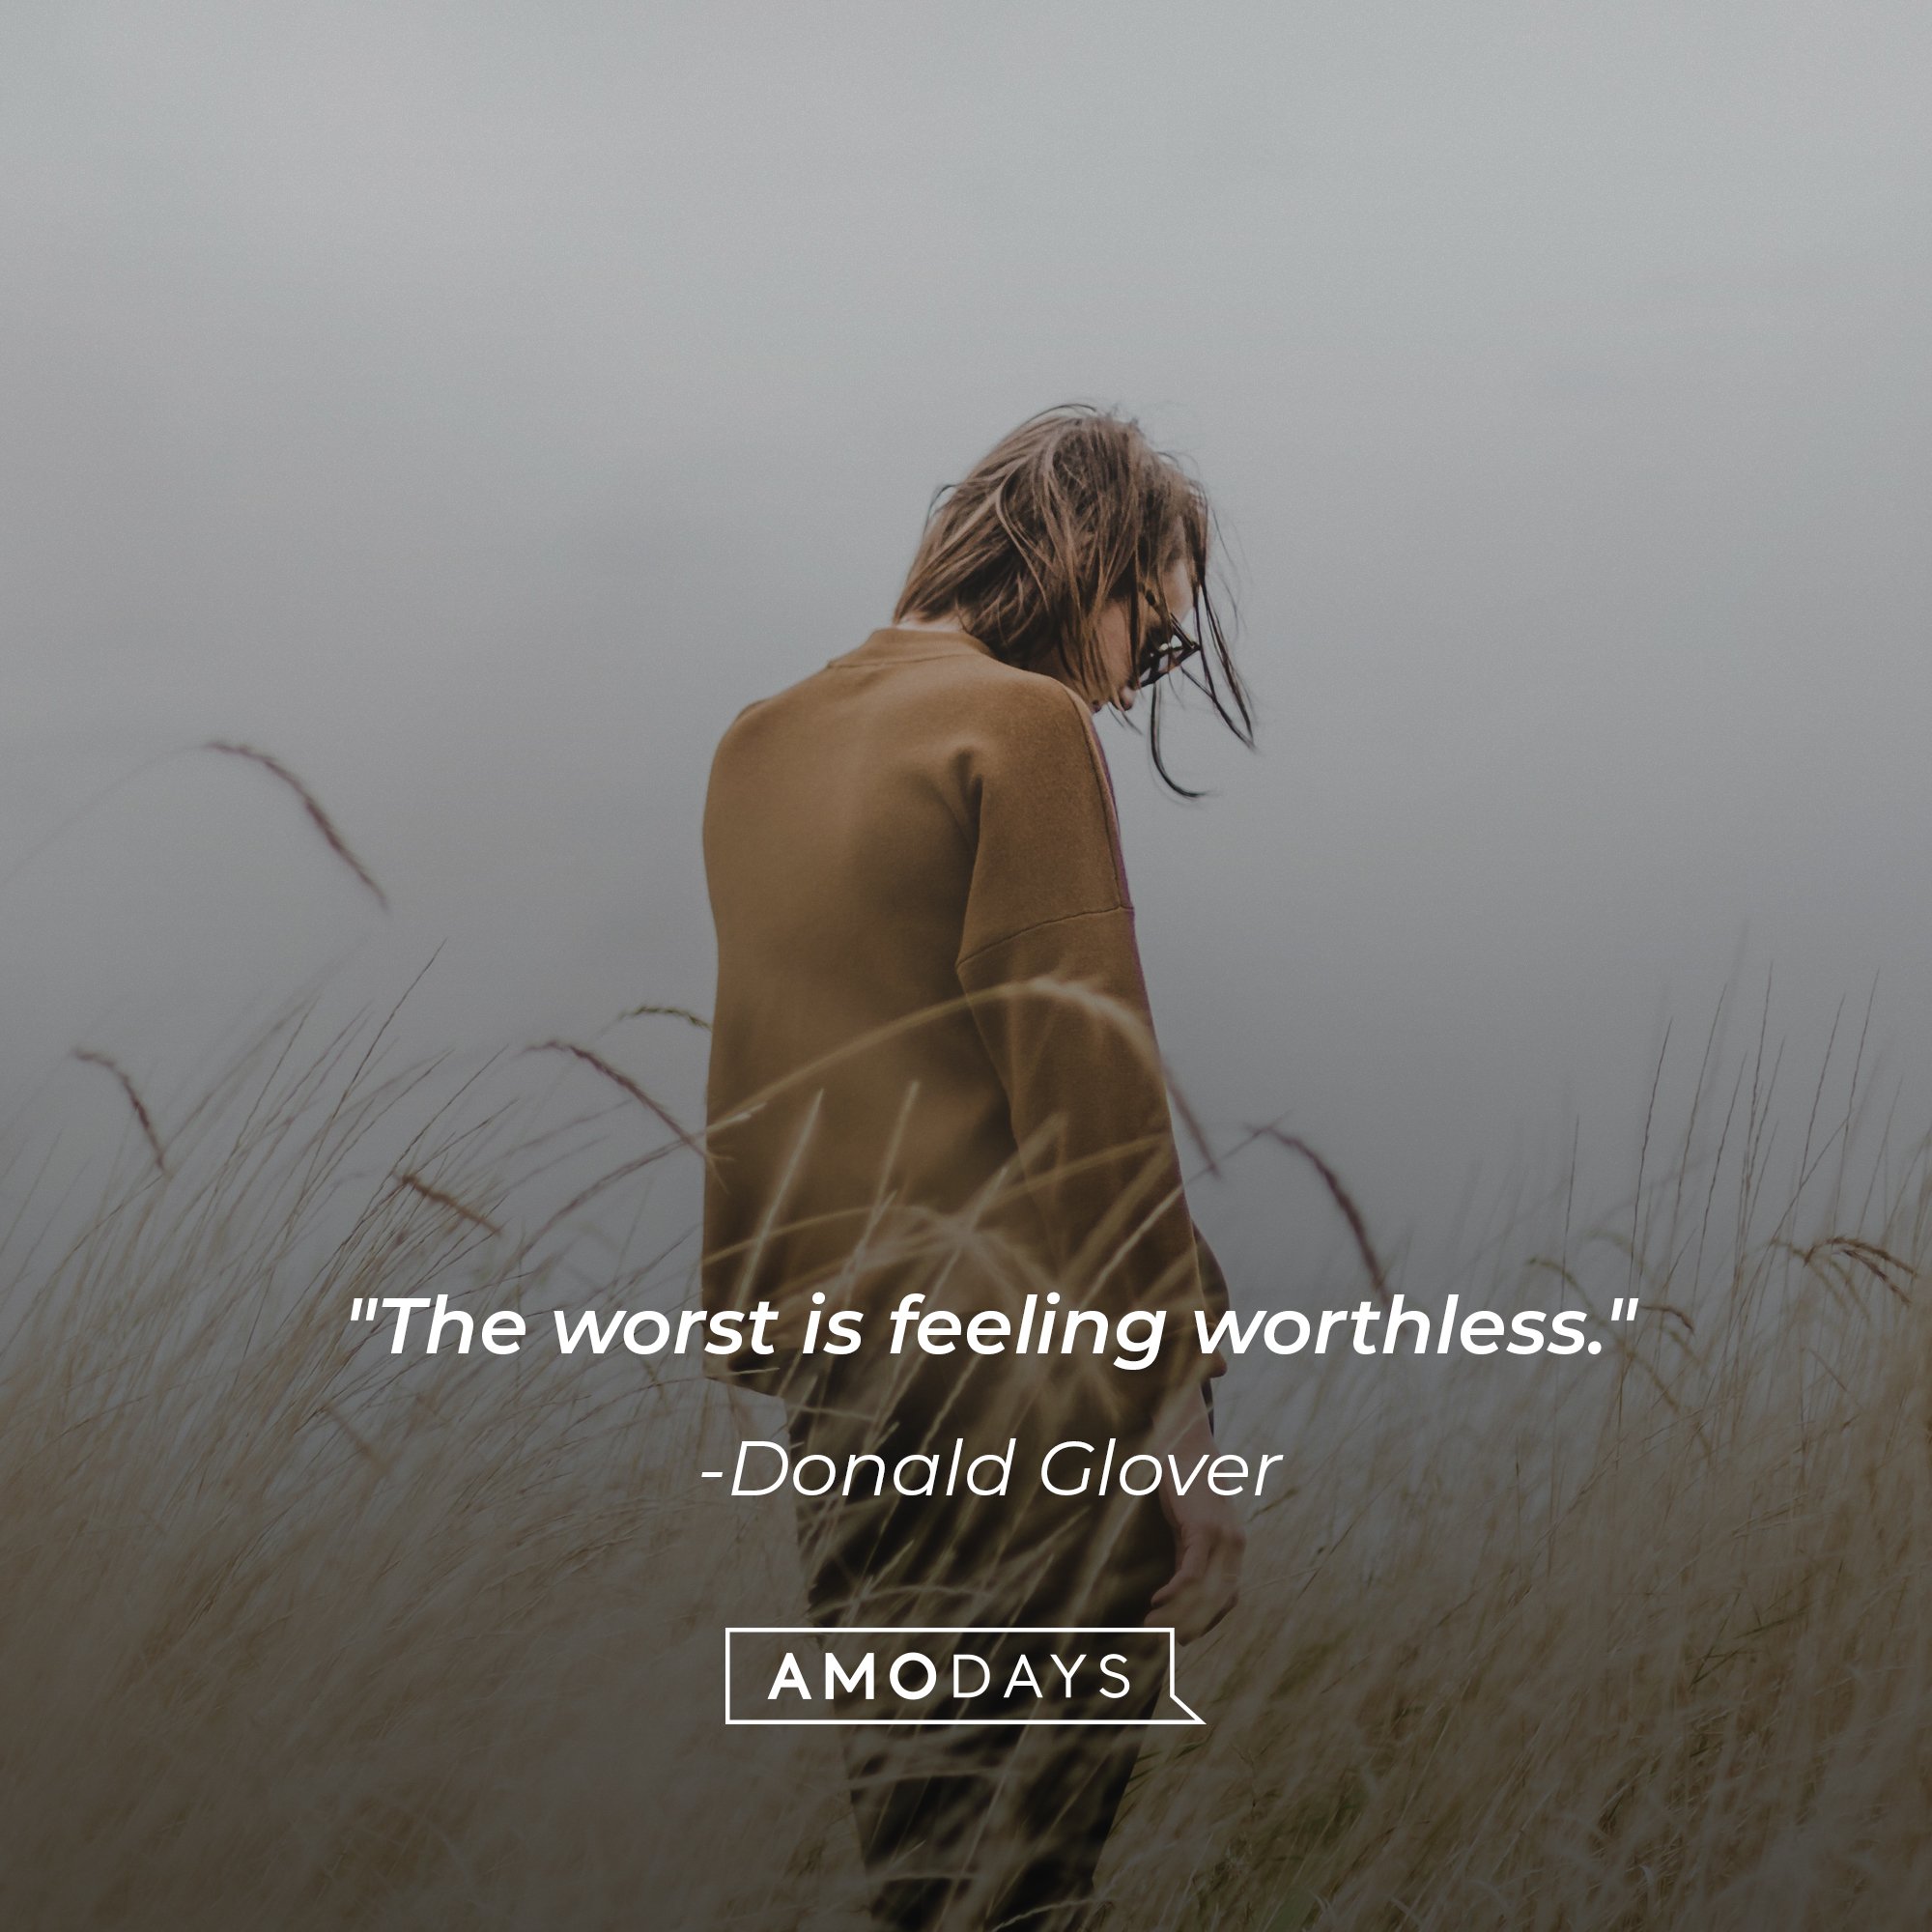 Donald Glover's quote: "The worst is feeling worthless." | Image: AmoDays